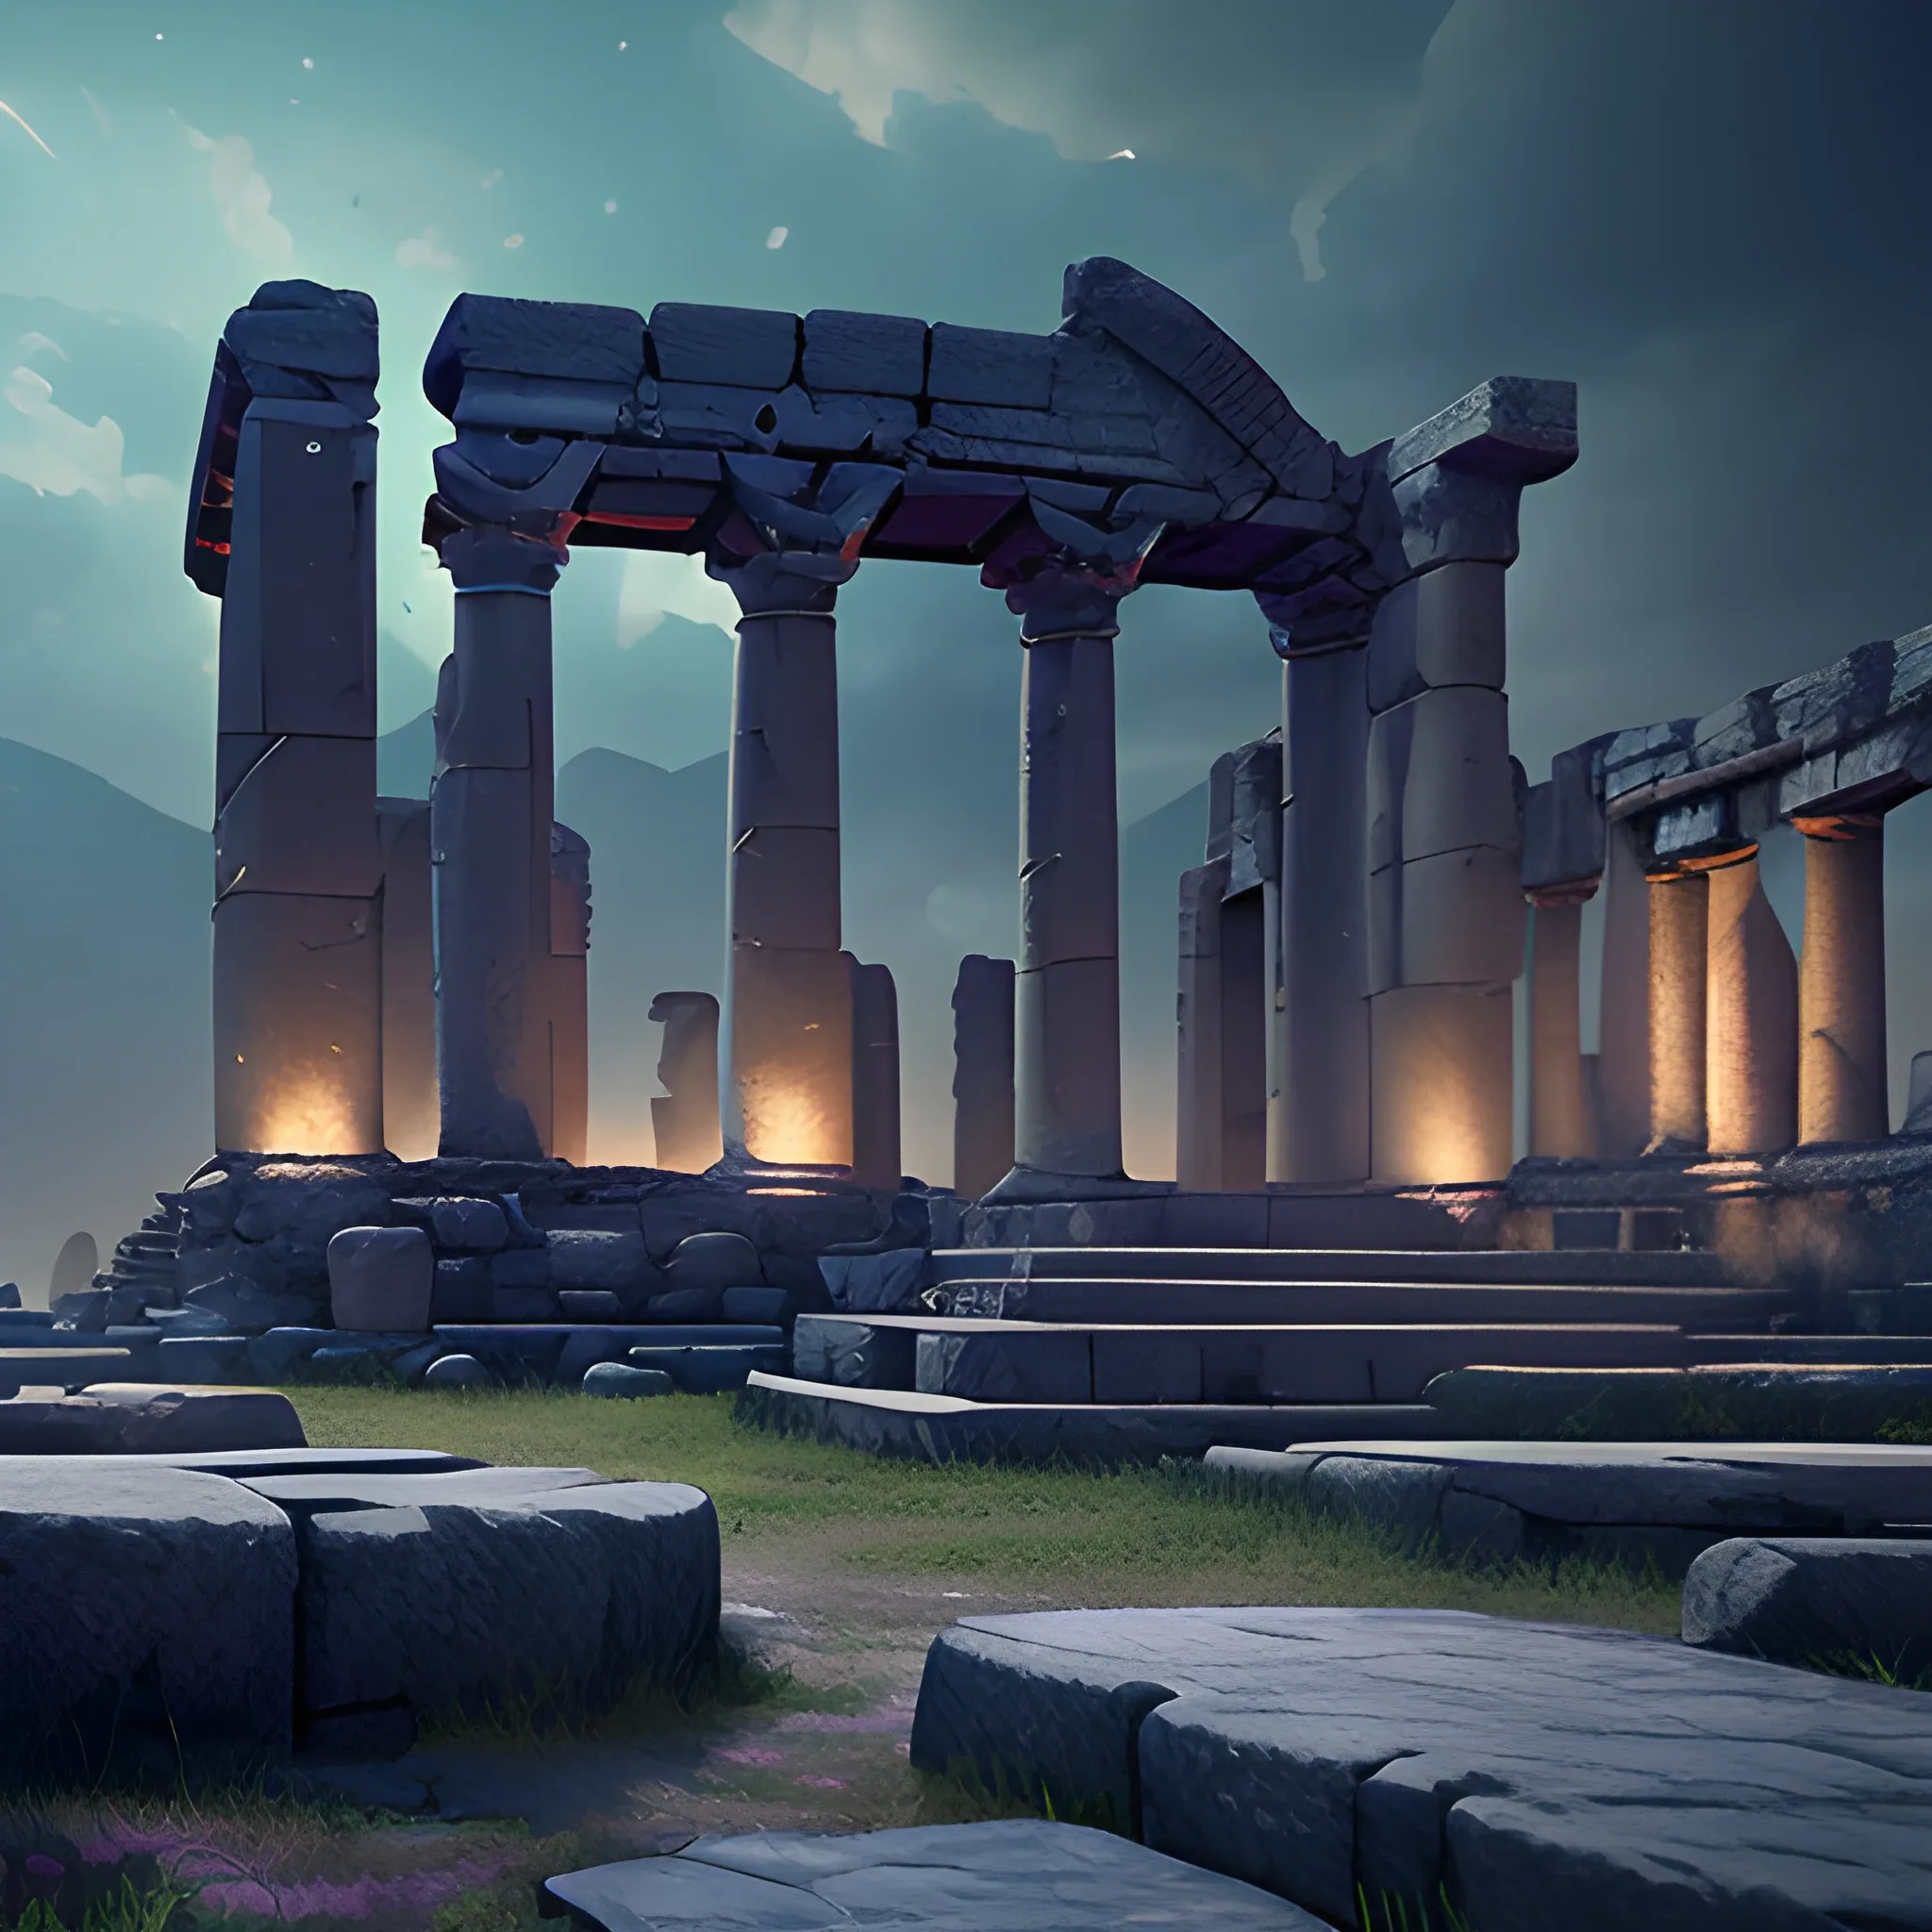 "Lonely Planet, ancient ruins, mysterious atmosphere","cinematic lighting","3D",width: 1920, height: 1080, "seed": "566136464", step:"30", "version": "SH_Deliberate"